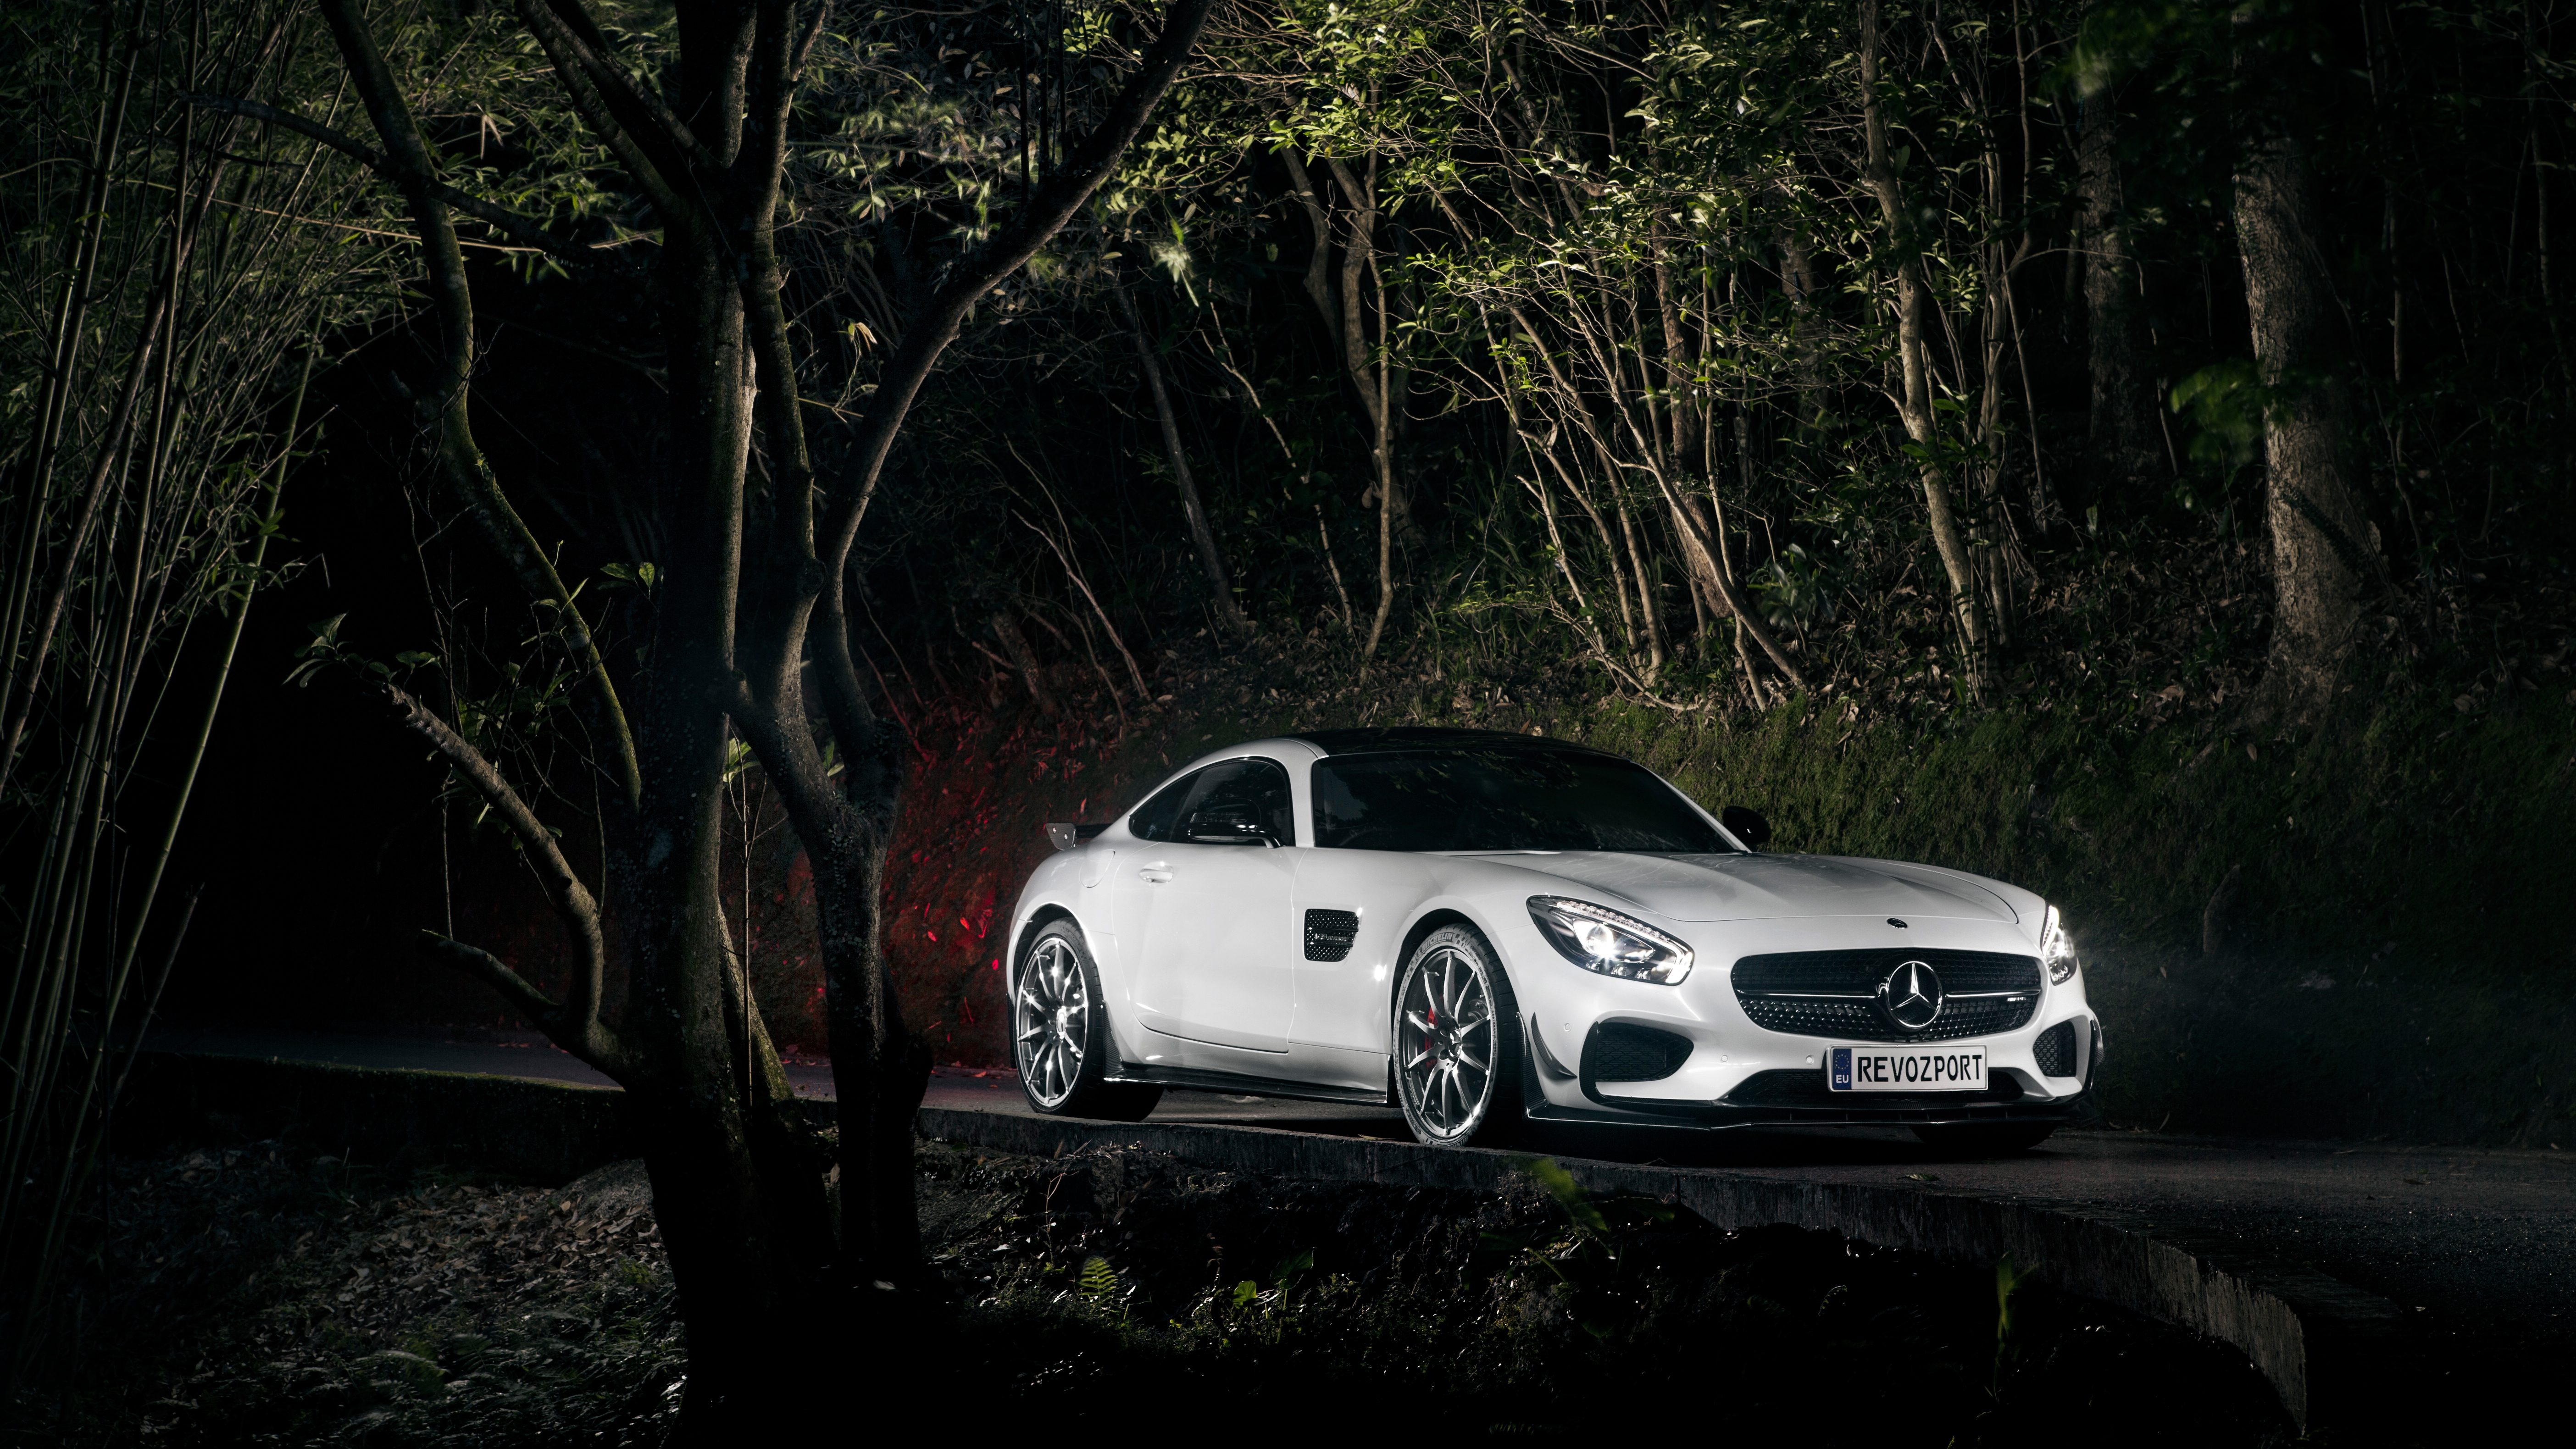 Wallpapers Mercedes Benz cars white car on the desktop